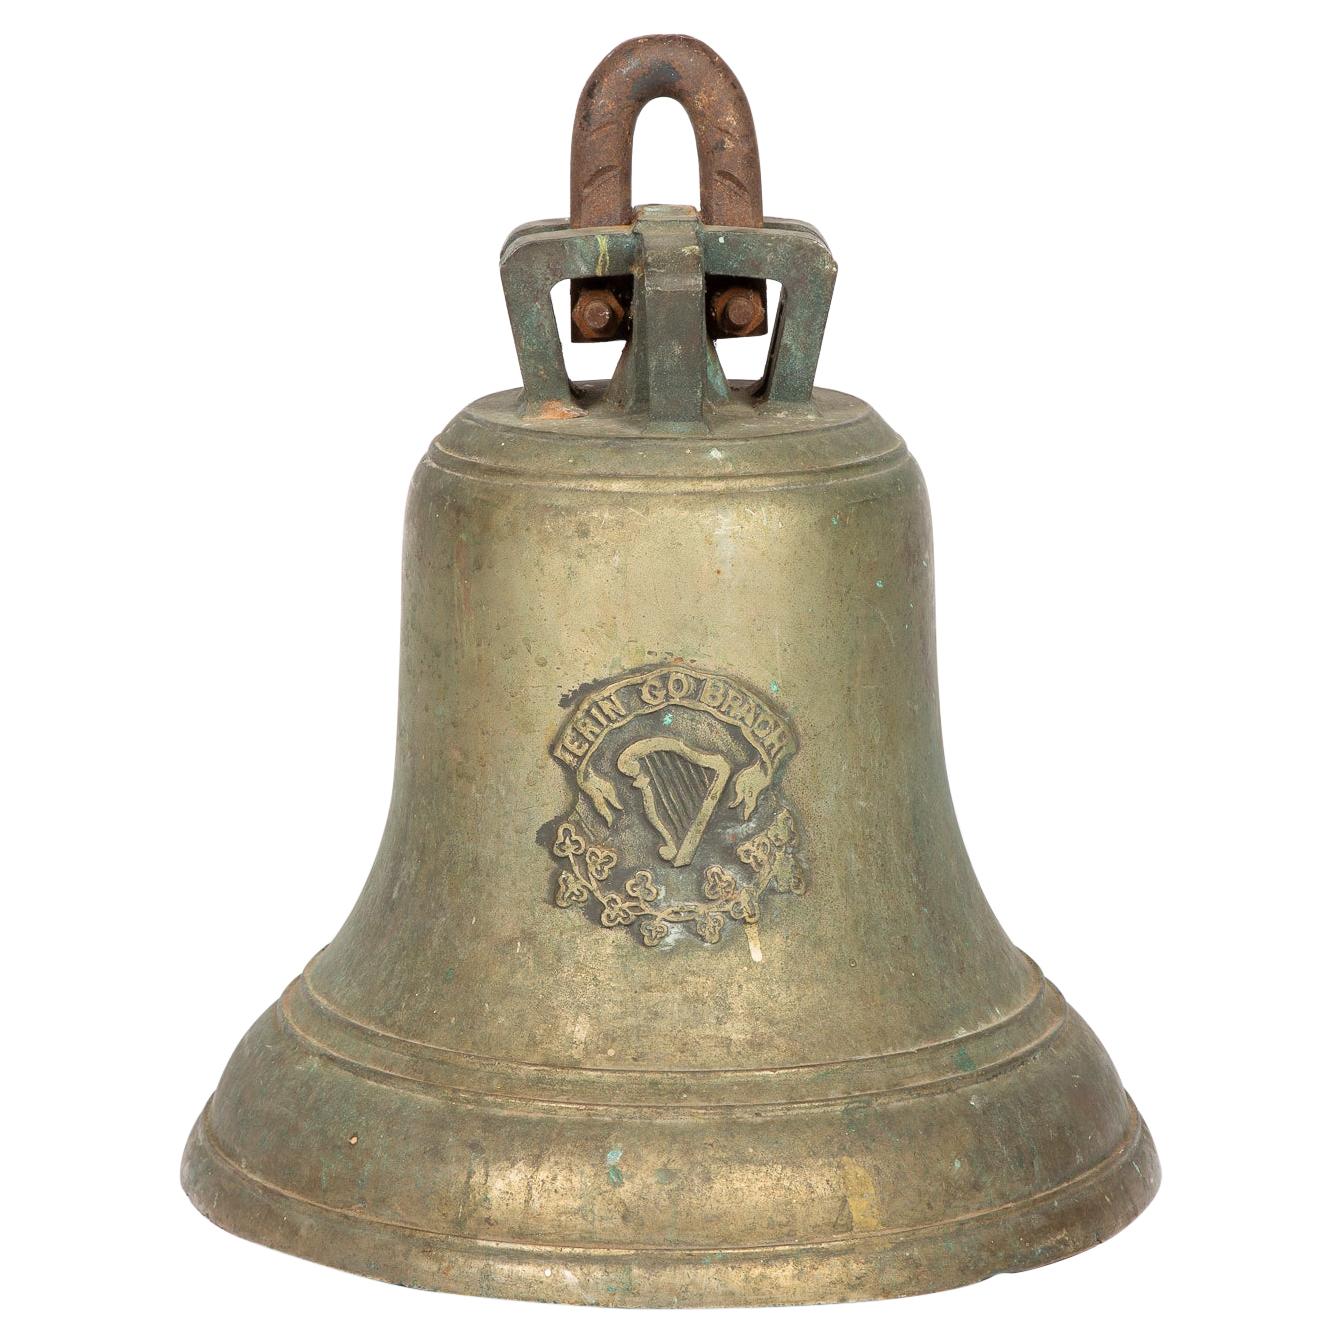 Mid-19th Century Bell by James Sheridan’s Eagle Foundry of Dublin